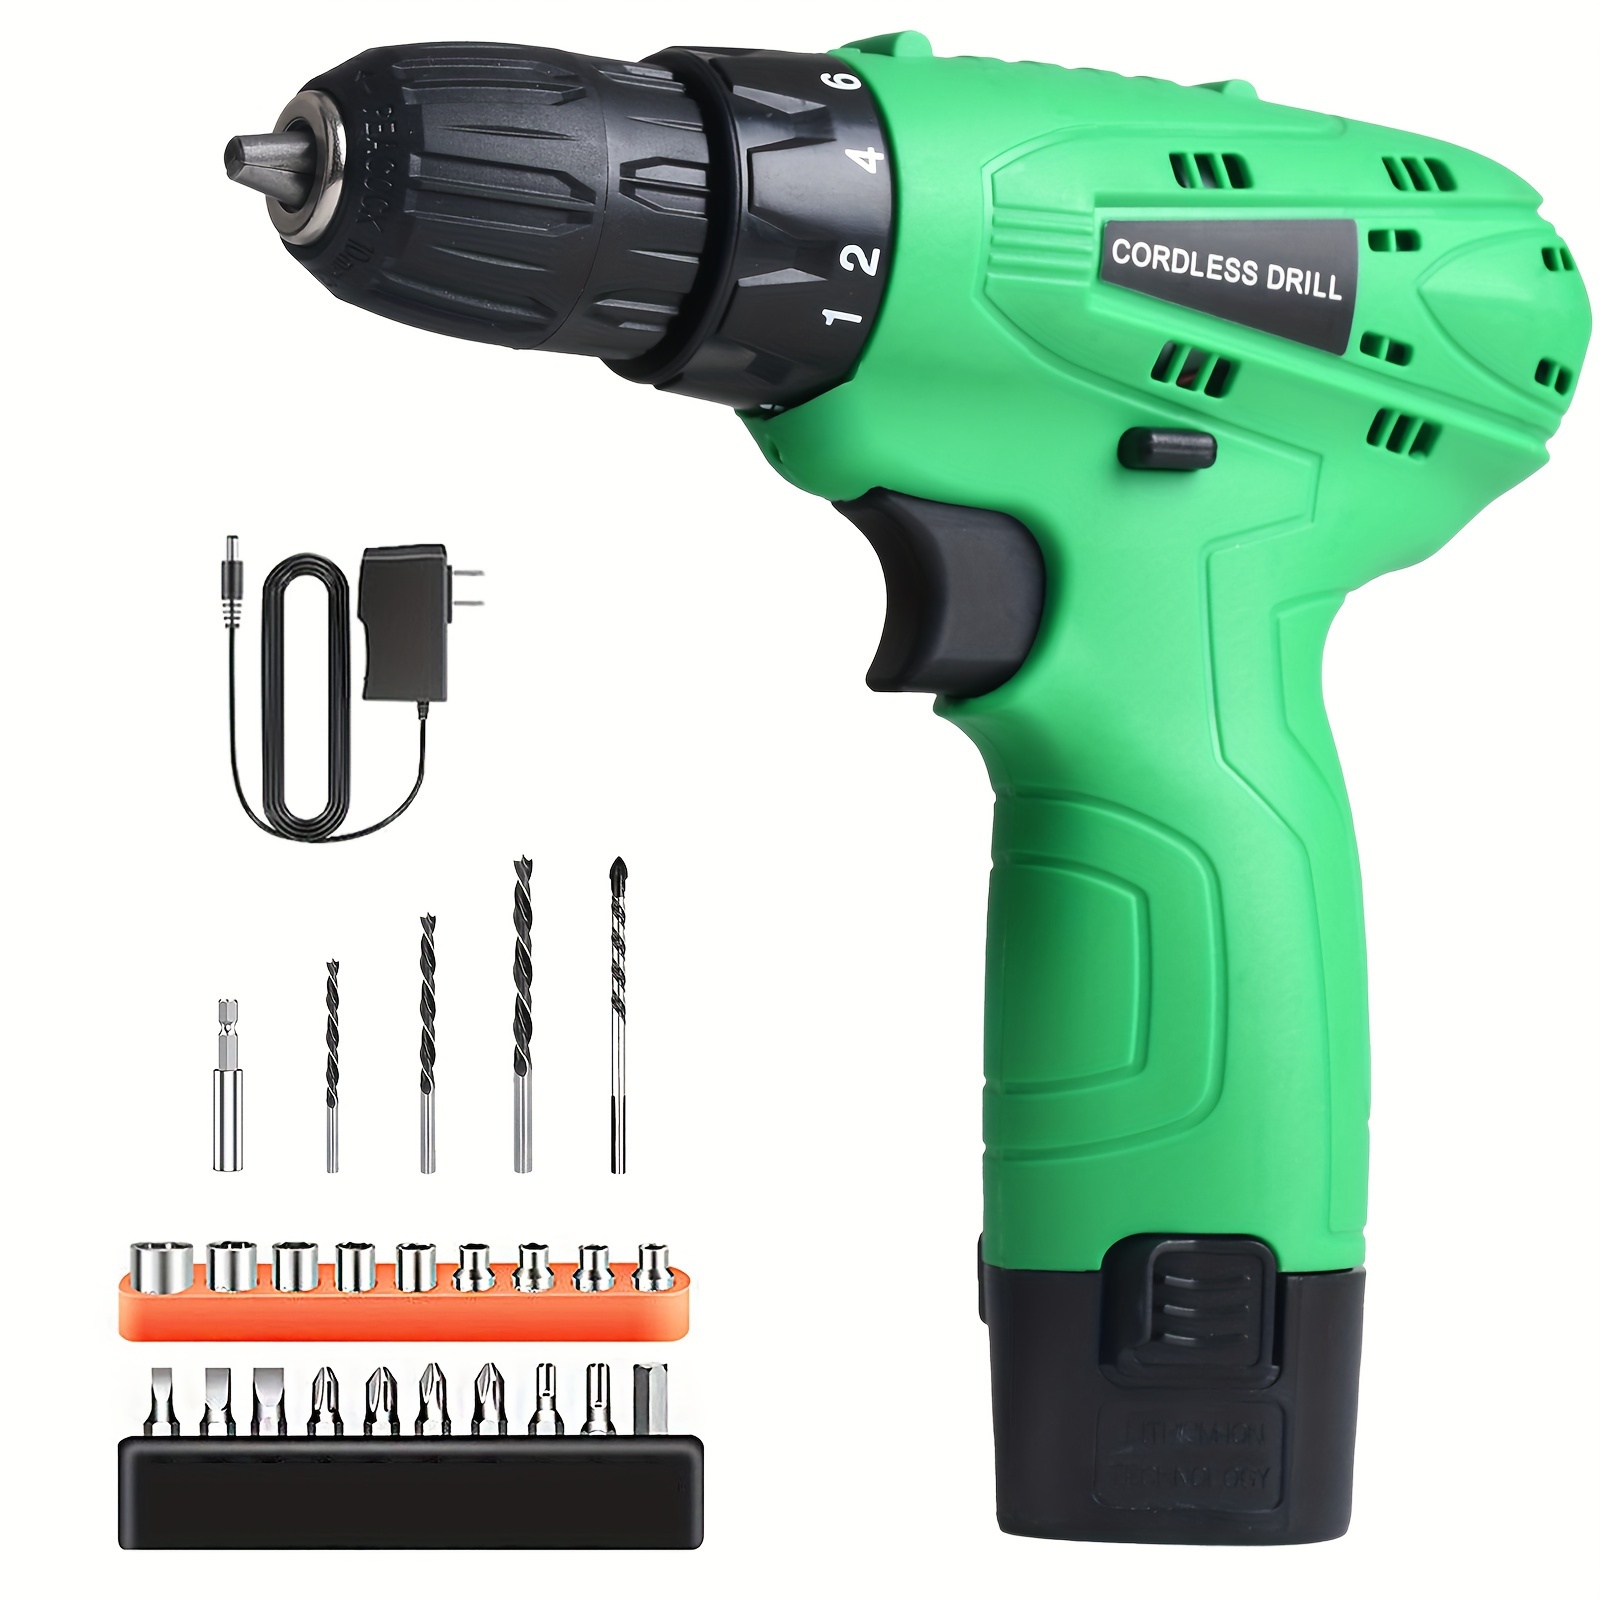 3-Speed Cordless Mini Drill Pen With 8 Small Drill Bits,Rechargeable  Electric Hand Drill Pin Vise,Micro Drill Set For Jewelry